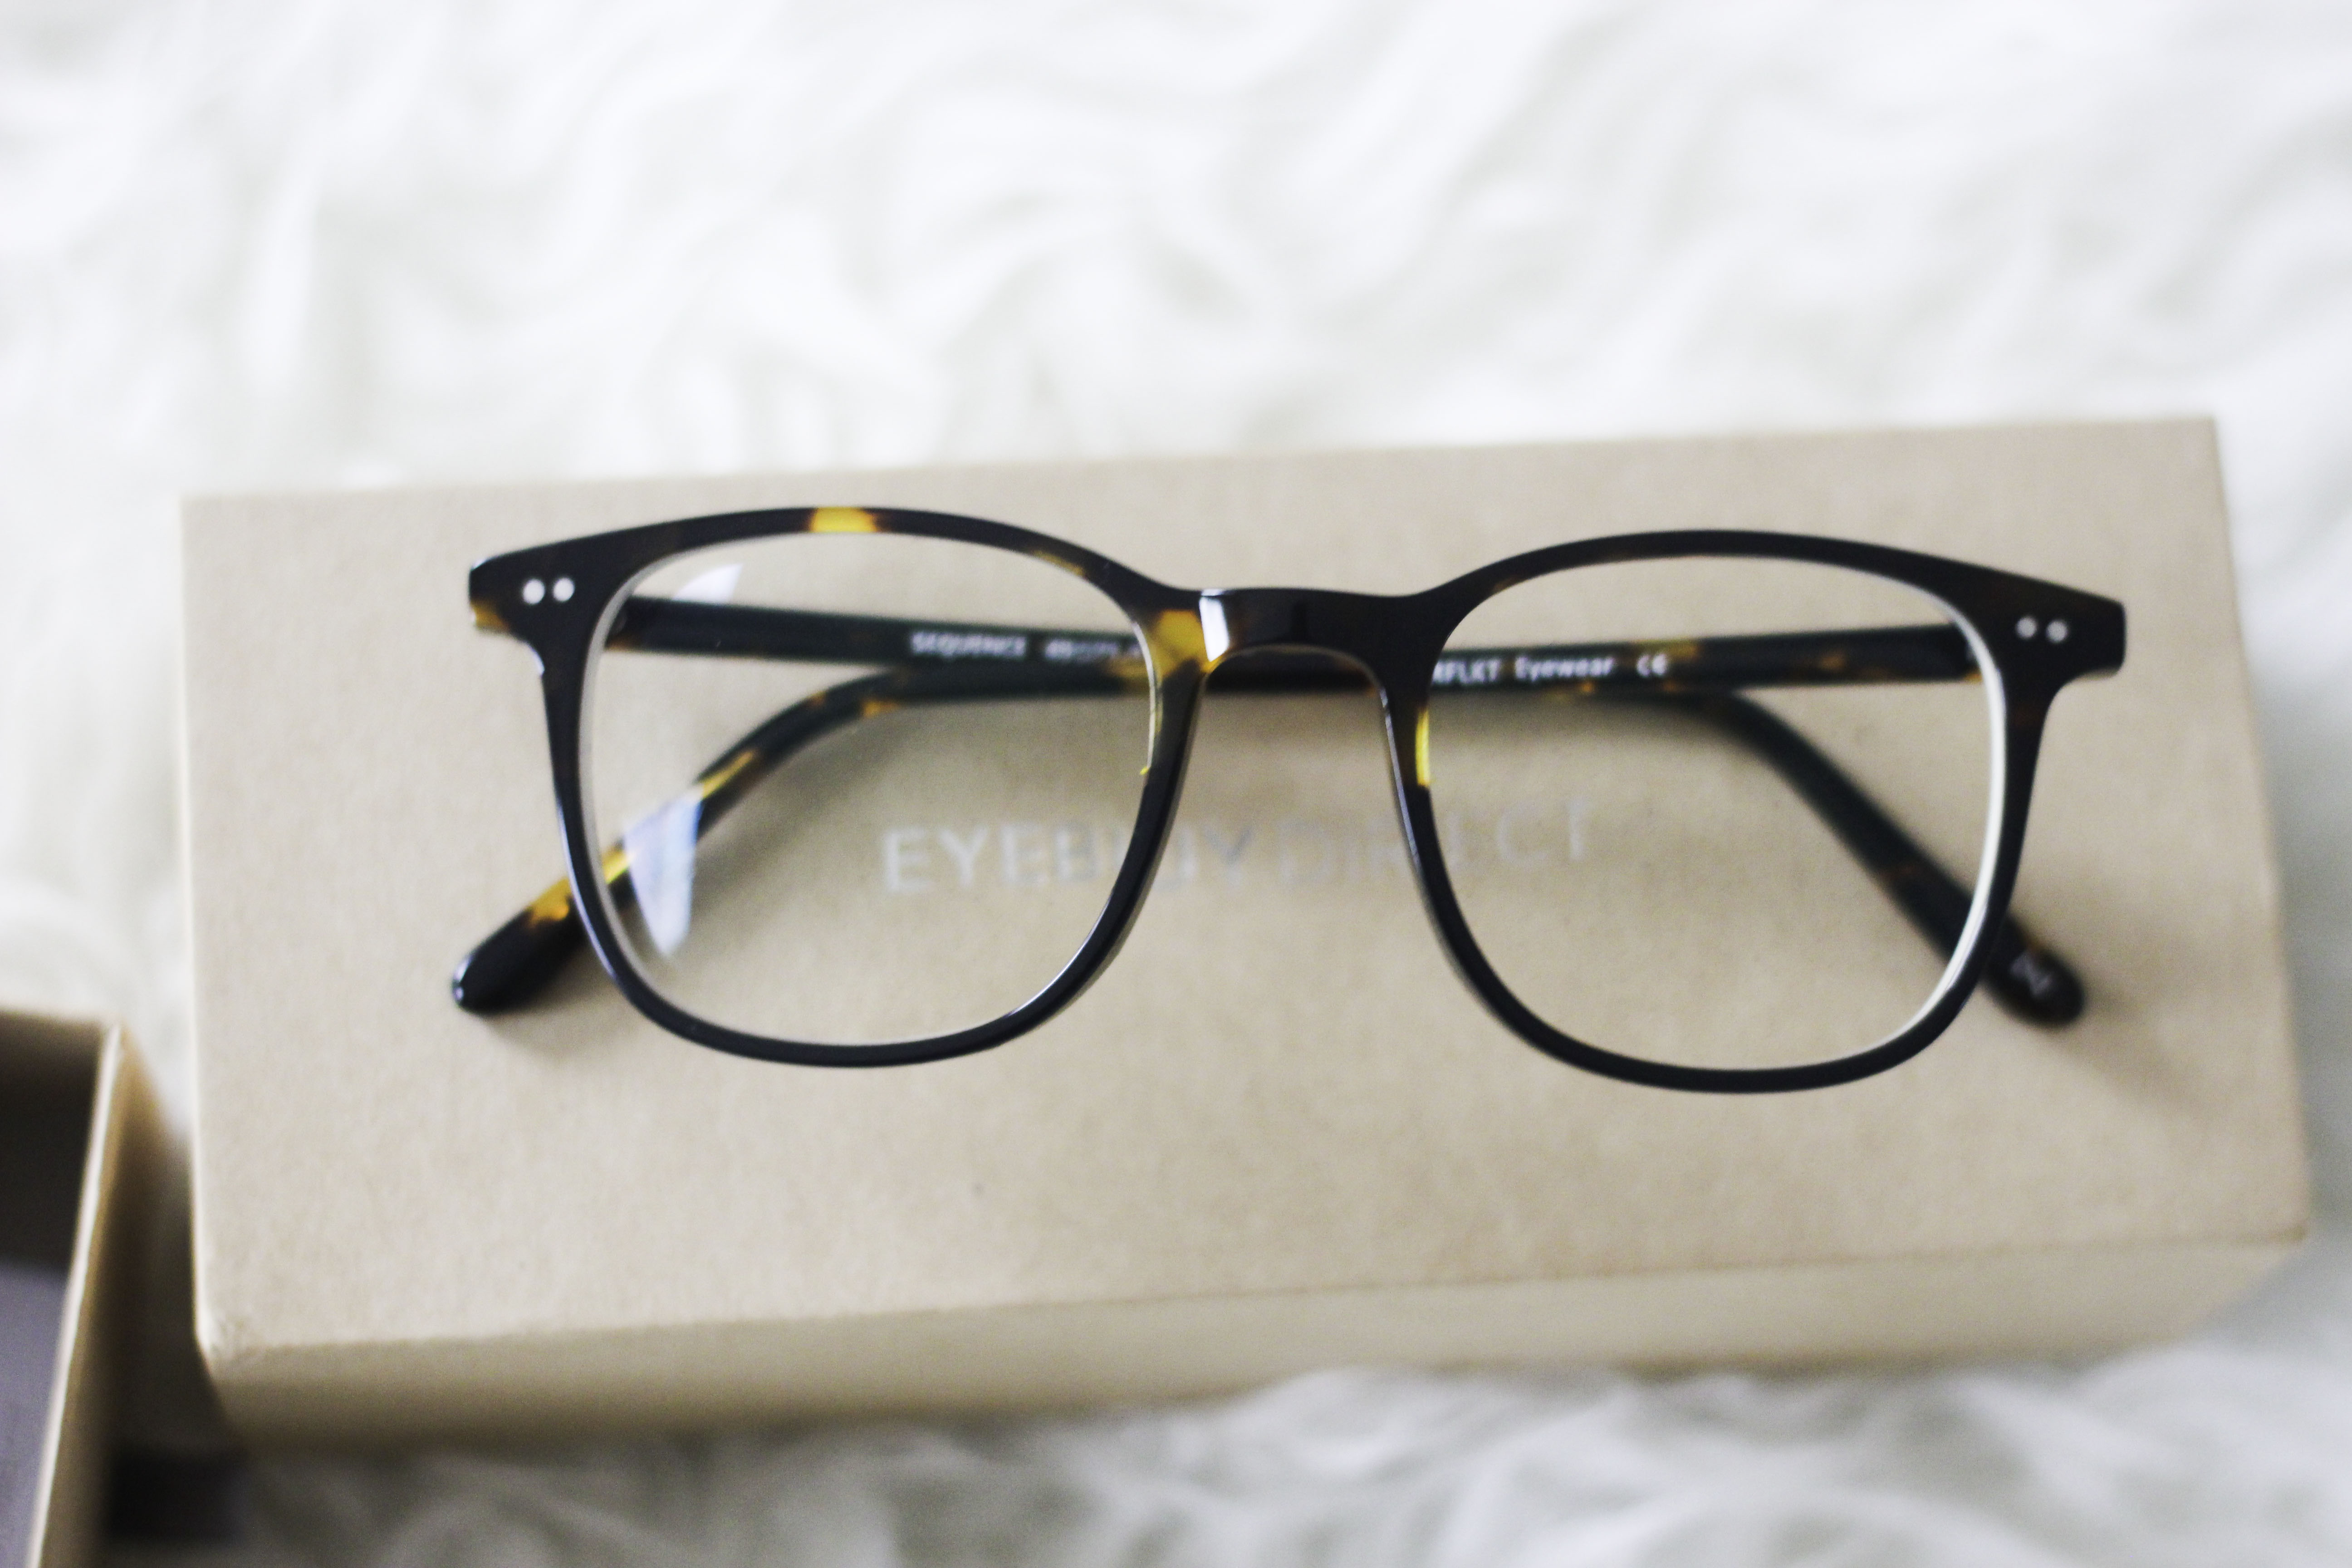 EyeBuyDirect Review Archives fashionandstylepolice